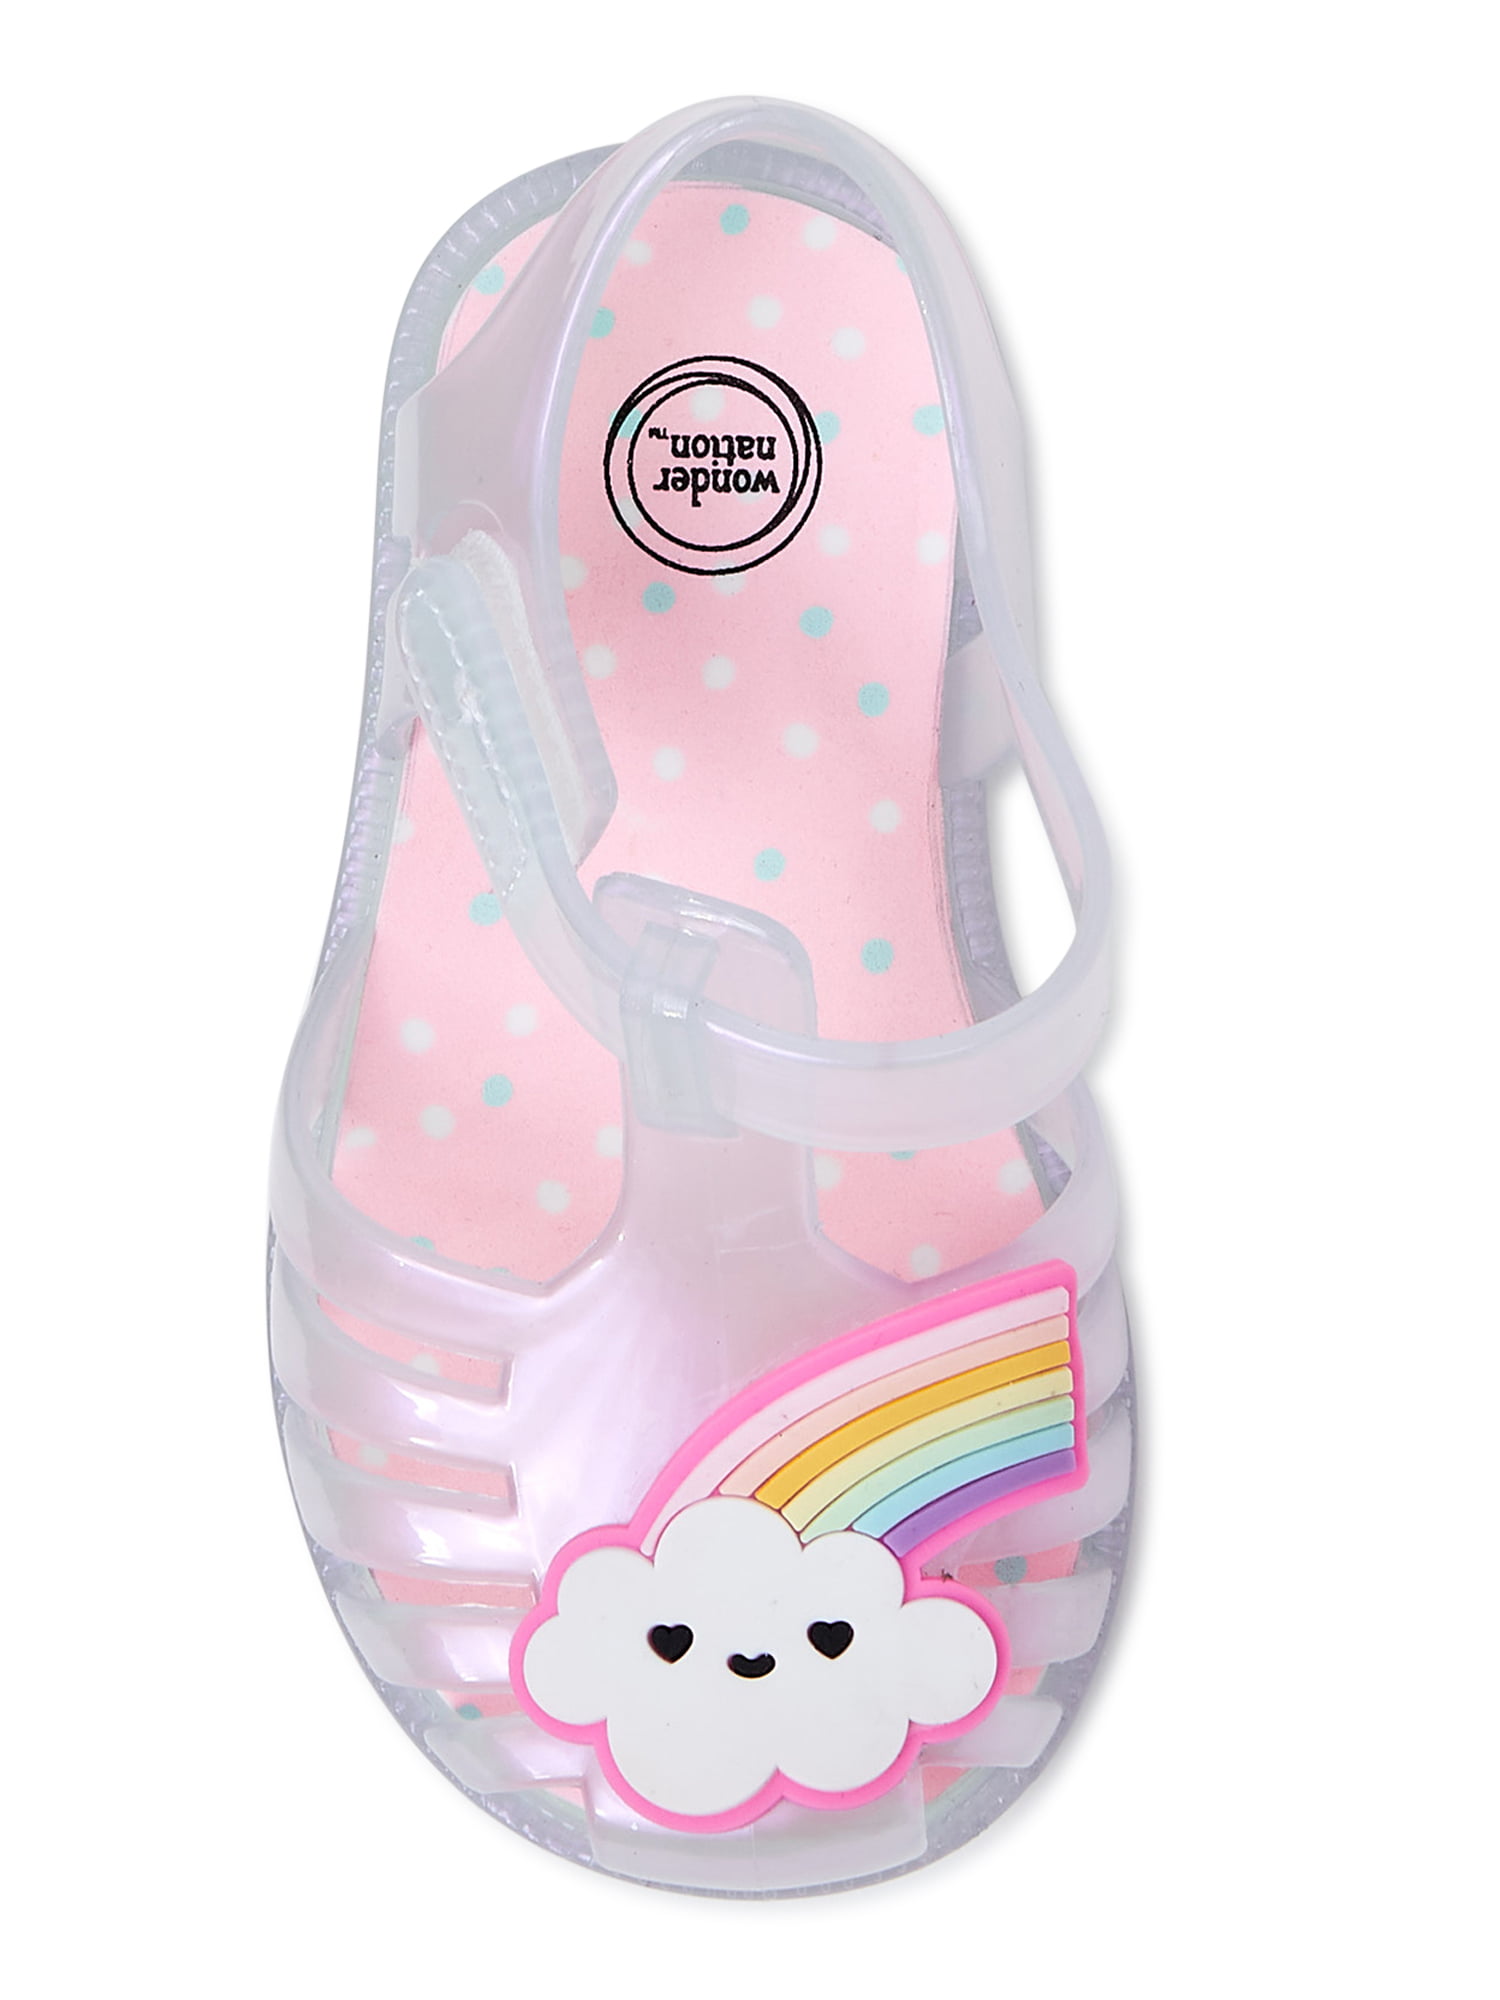 10 12, Toddler Girls Wonder Nation Mary Jane Jelly Shoe Clear 7 8 11 